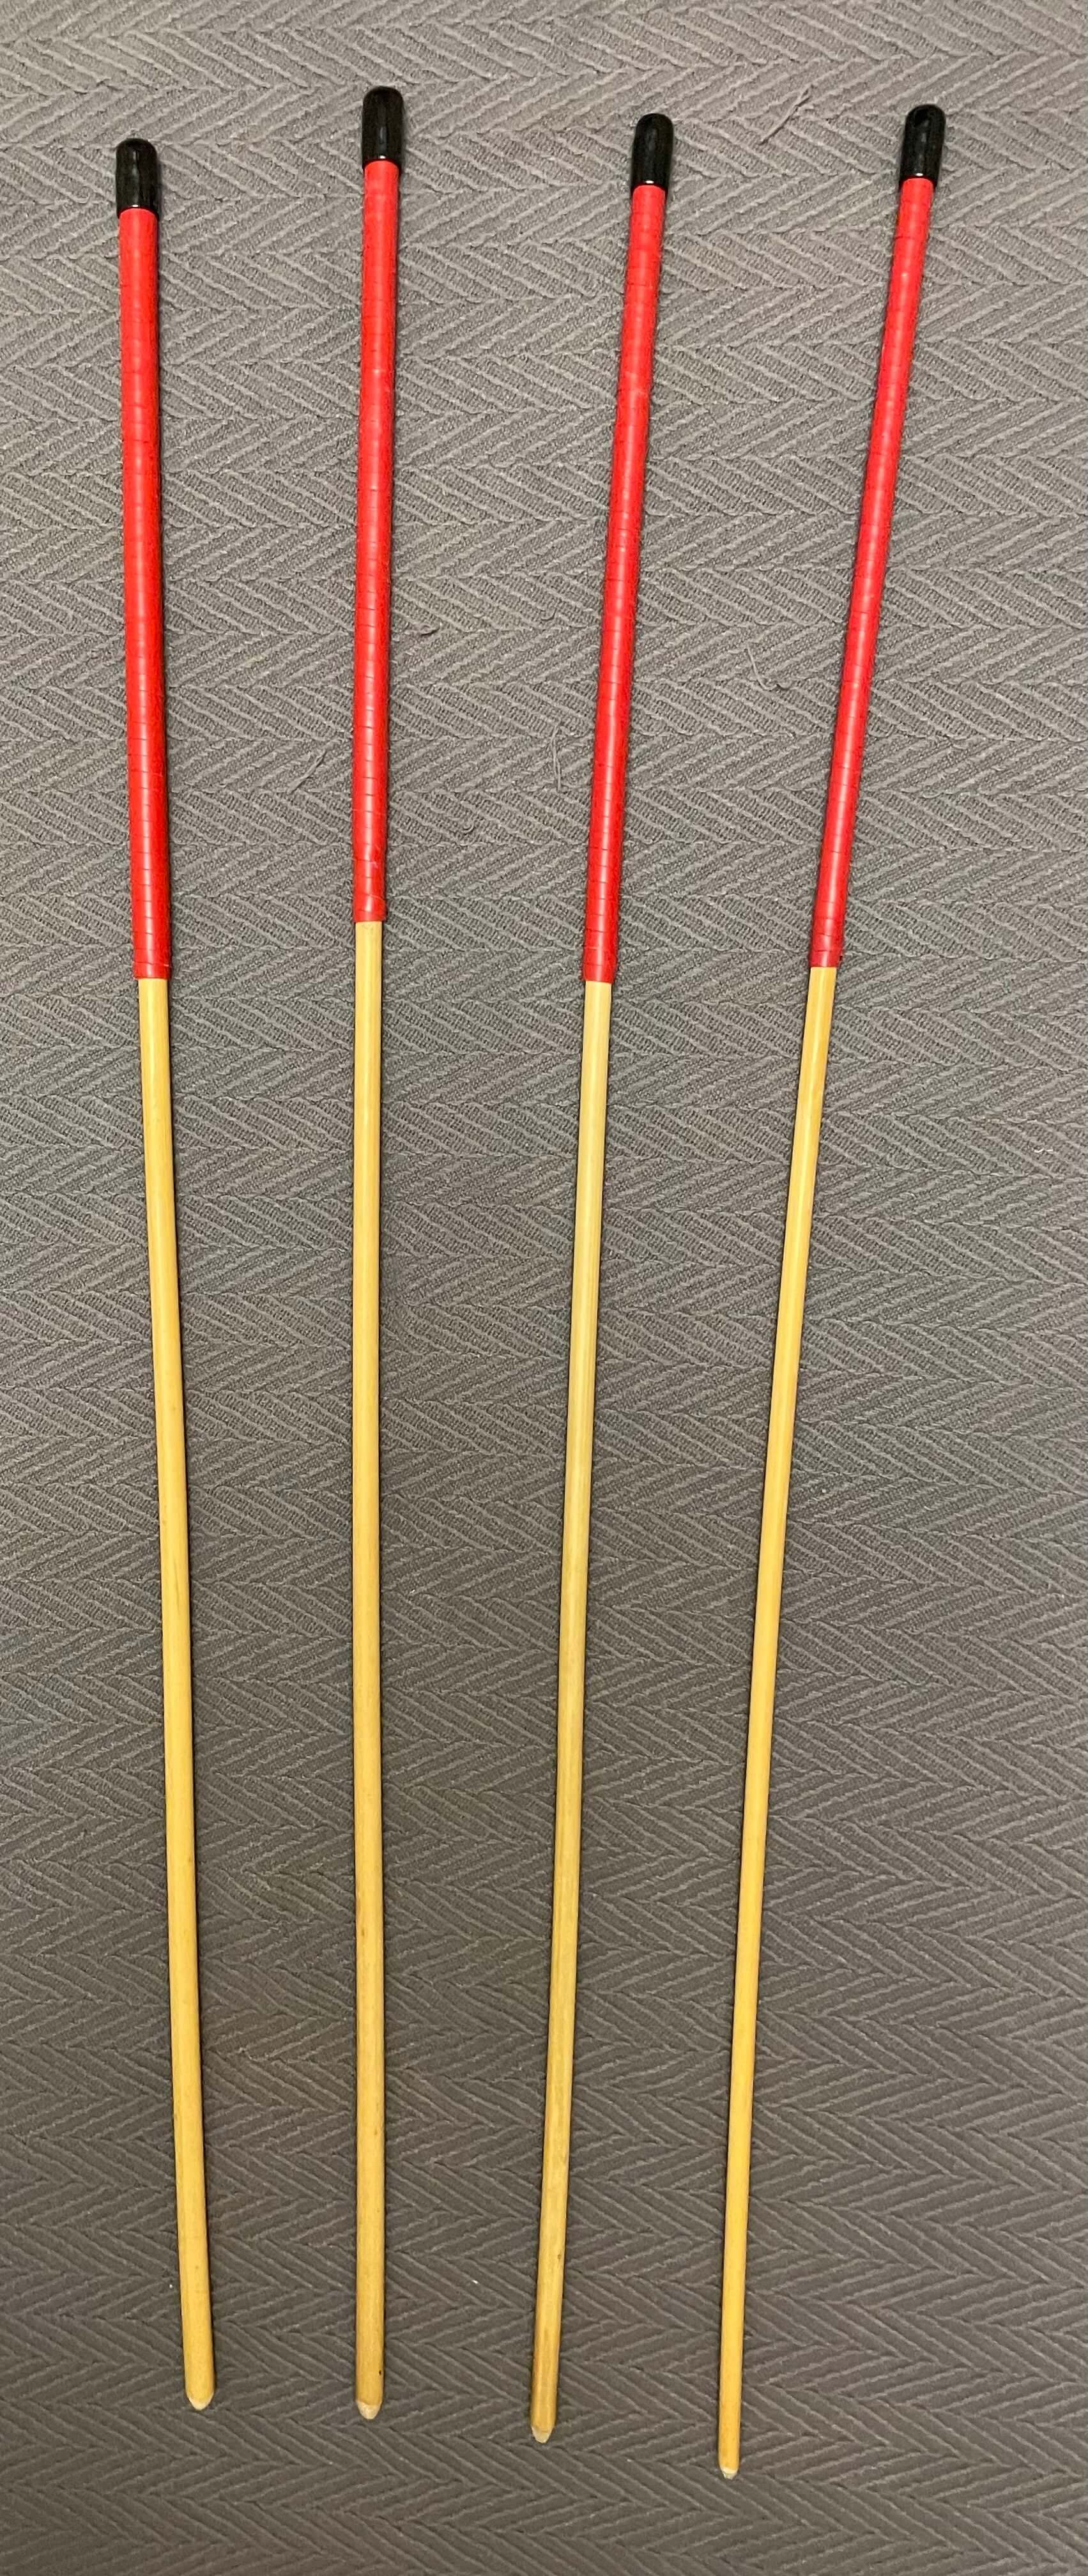 Dragon Cane Professional Set of 4 rattan canes / School Canes / BDSM Canes- 90 cms Length - Brandy or Red Kangaroo Leather Handles - Englishvice Canes